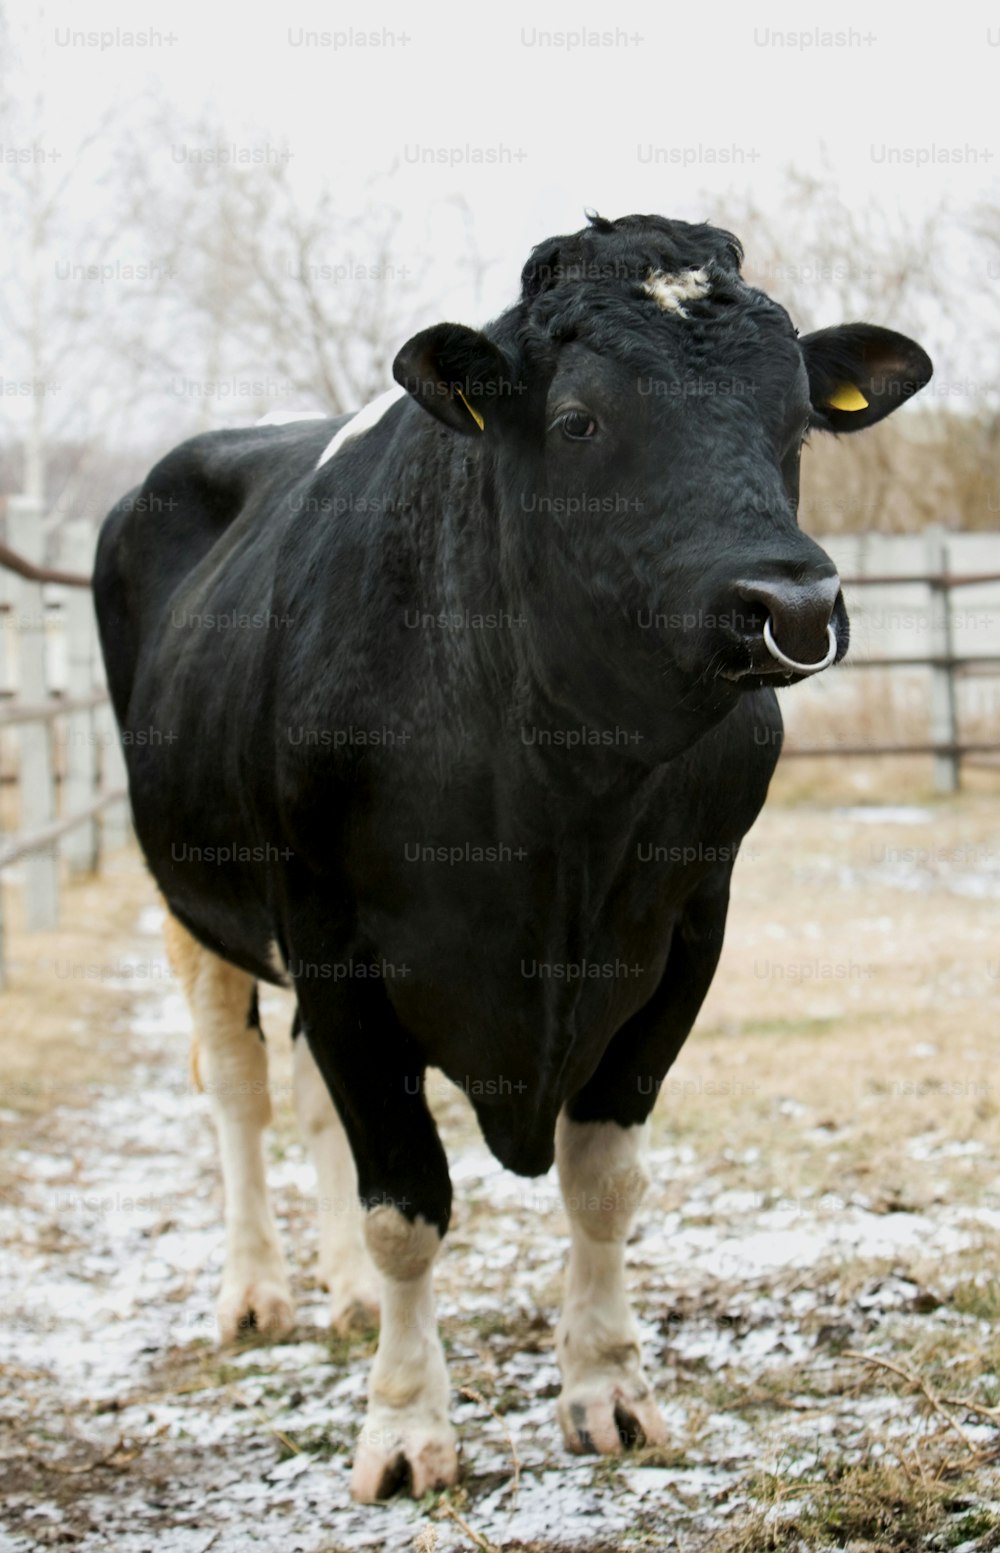 a black cow standing in a fenced in area